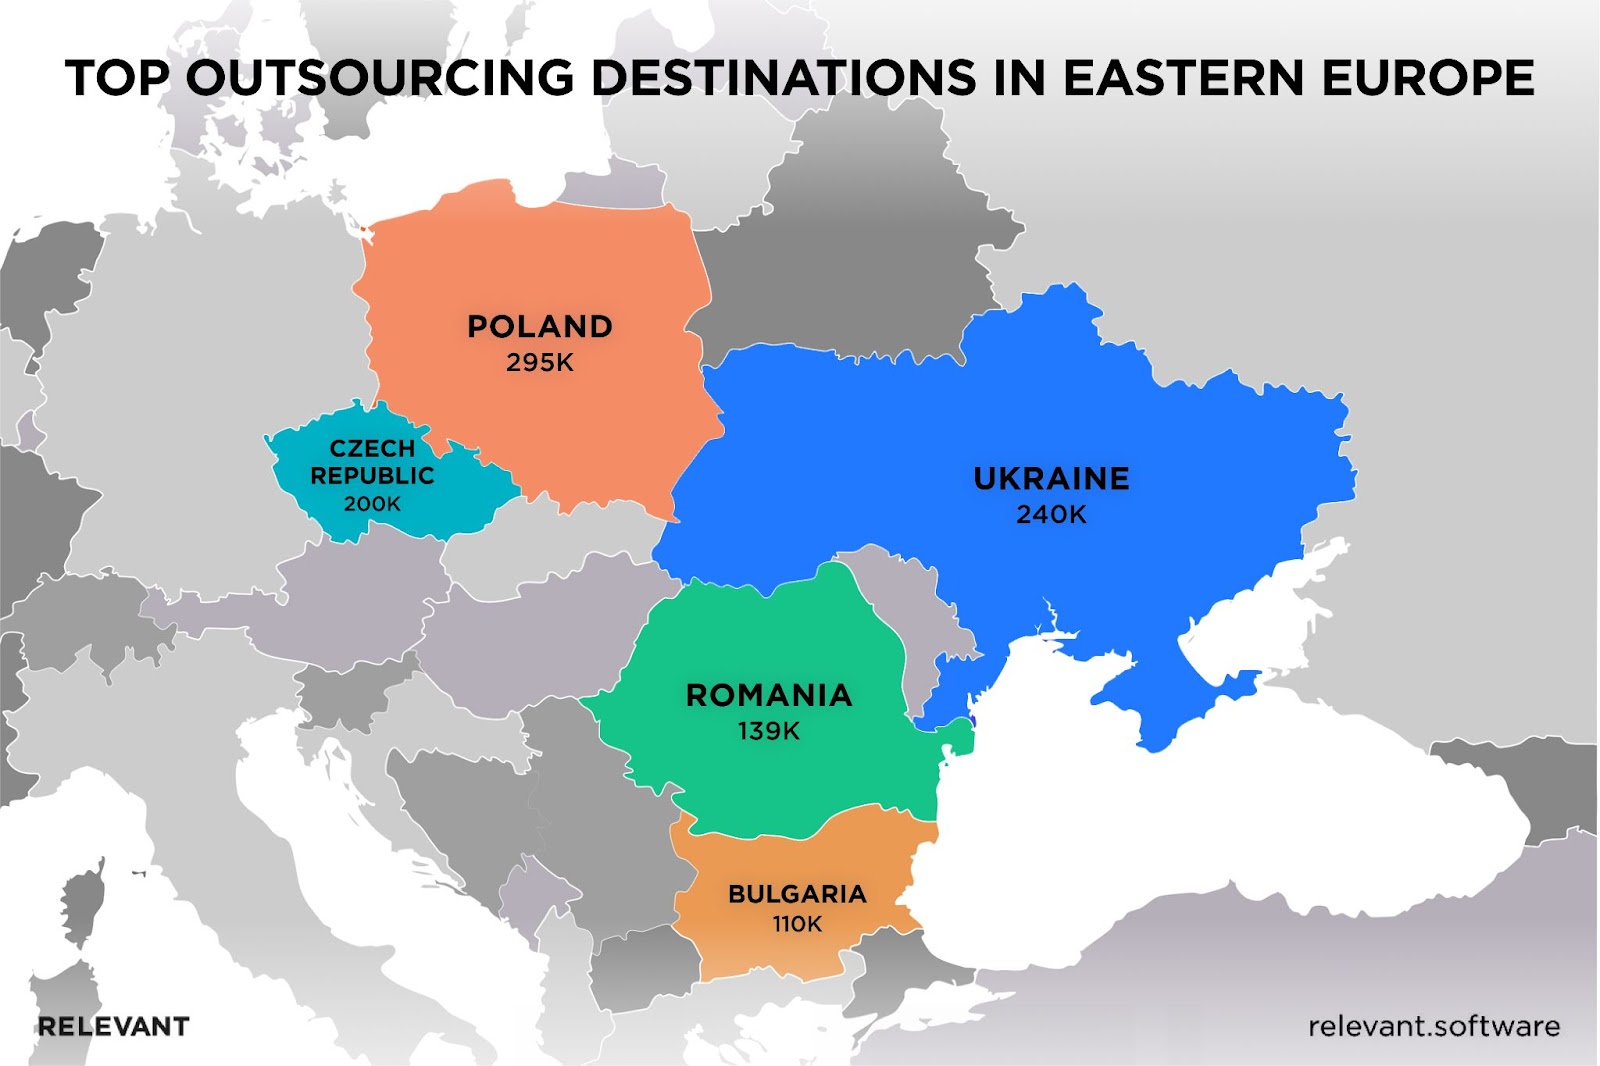 Outsourcing to Eastern Europe